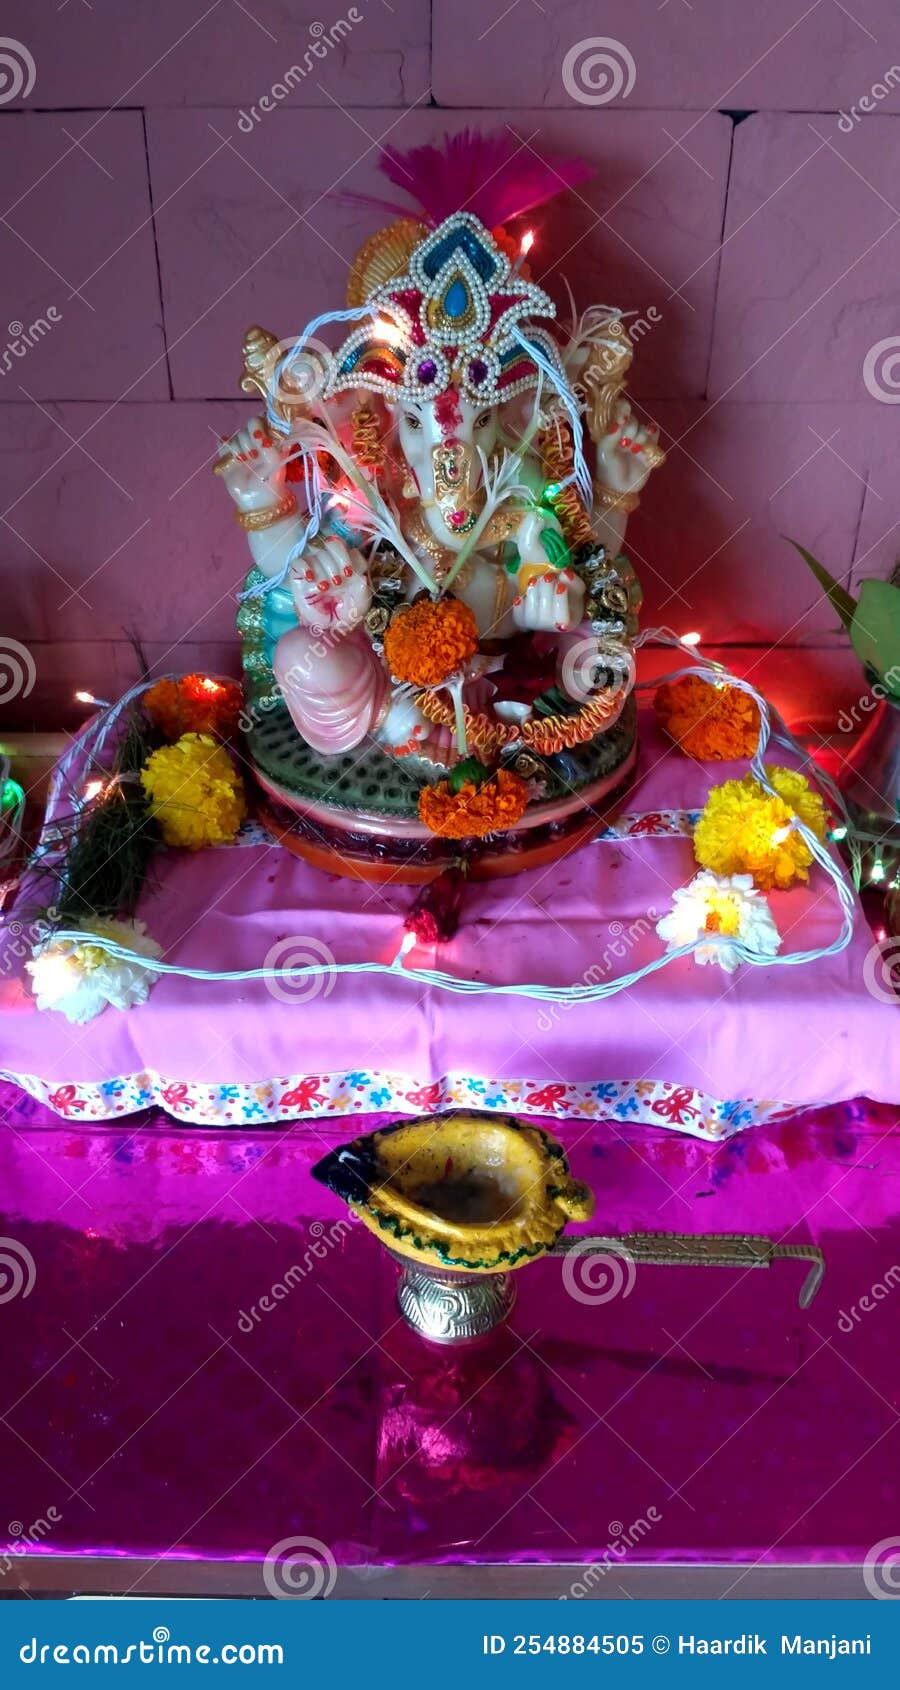 Ganesh Chaturthi Ideas - The Prettiest Pooja Decor and the most amazing  Ganesh idols we've seen! - Witty Vows